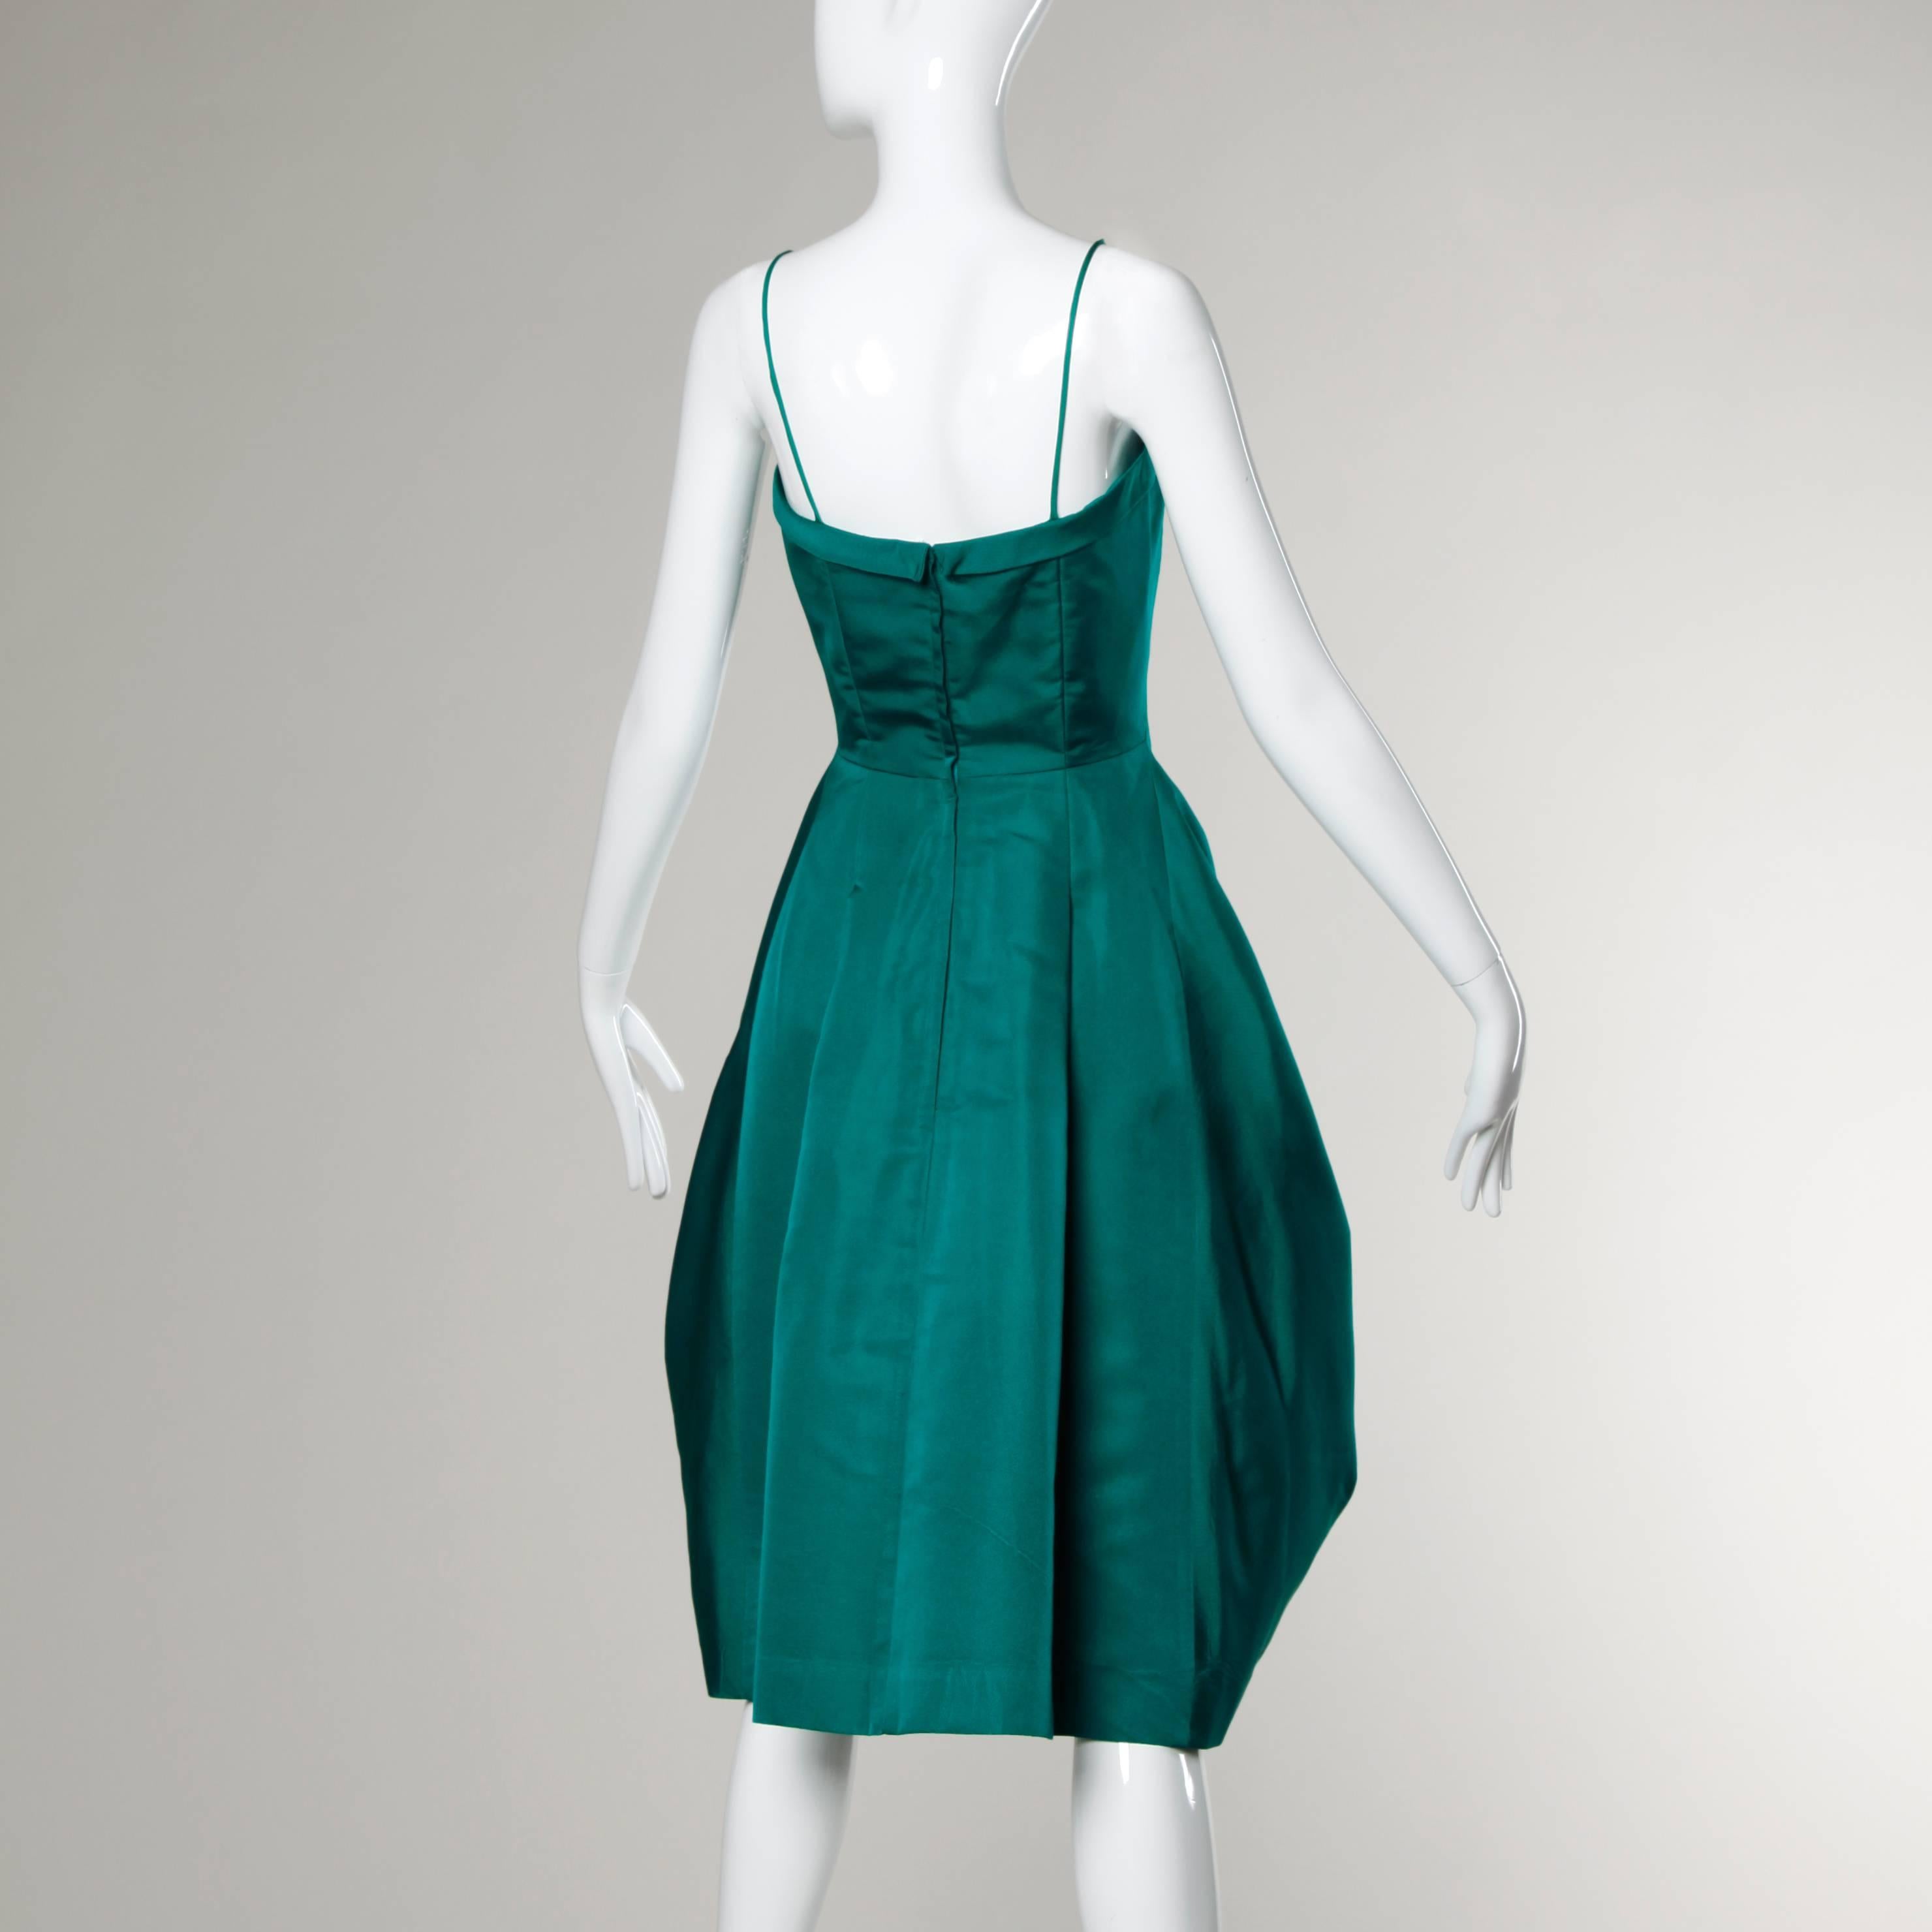 Blue Suzy Perette Vintage Green Silk Cocktail Dress with an Origami Bubble Hem, 1950s